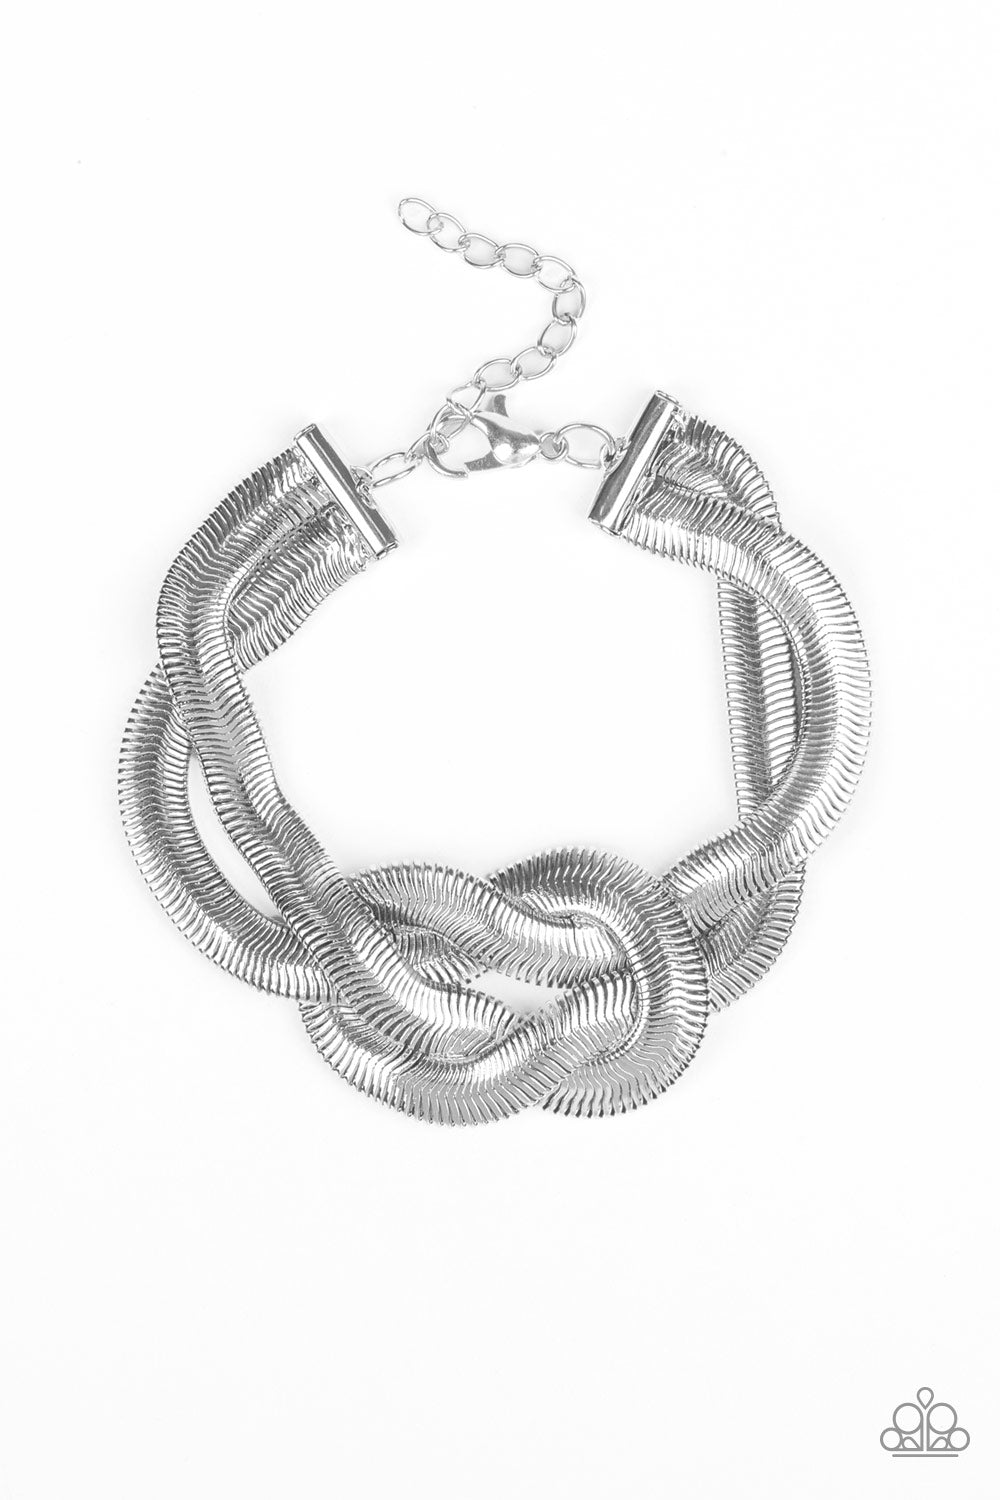 Paparazzi To The Max - Silver - Two Thick Herringbone Chains - Bracelet - $5 Jewelry with Ashley Swint